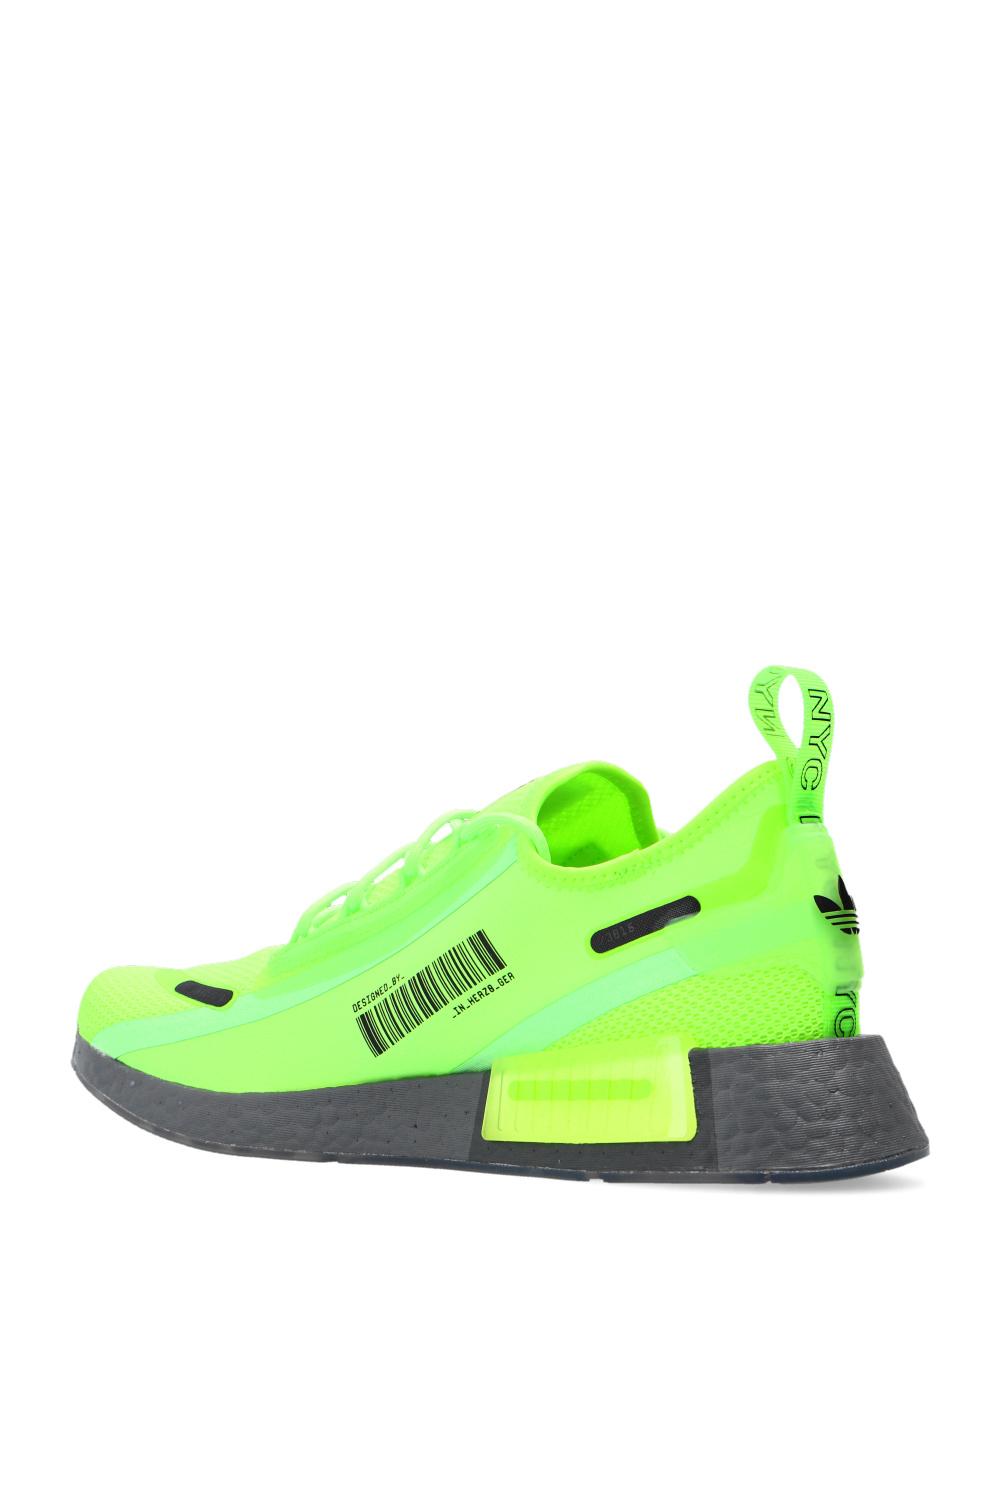 adidas Originals 'nmd_r1 Spectoo' Sneakers in Green for Men | Lyst